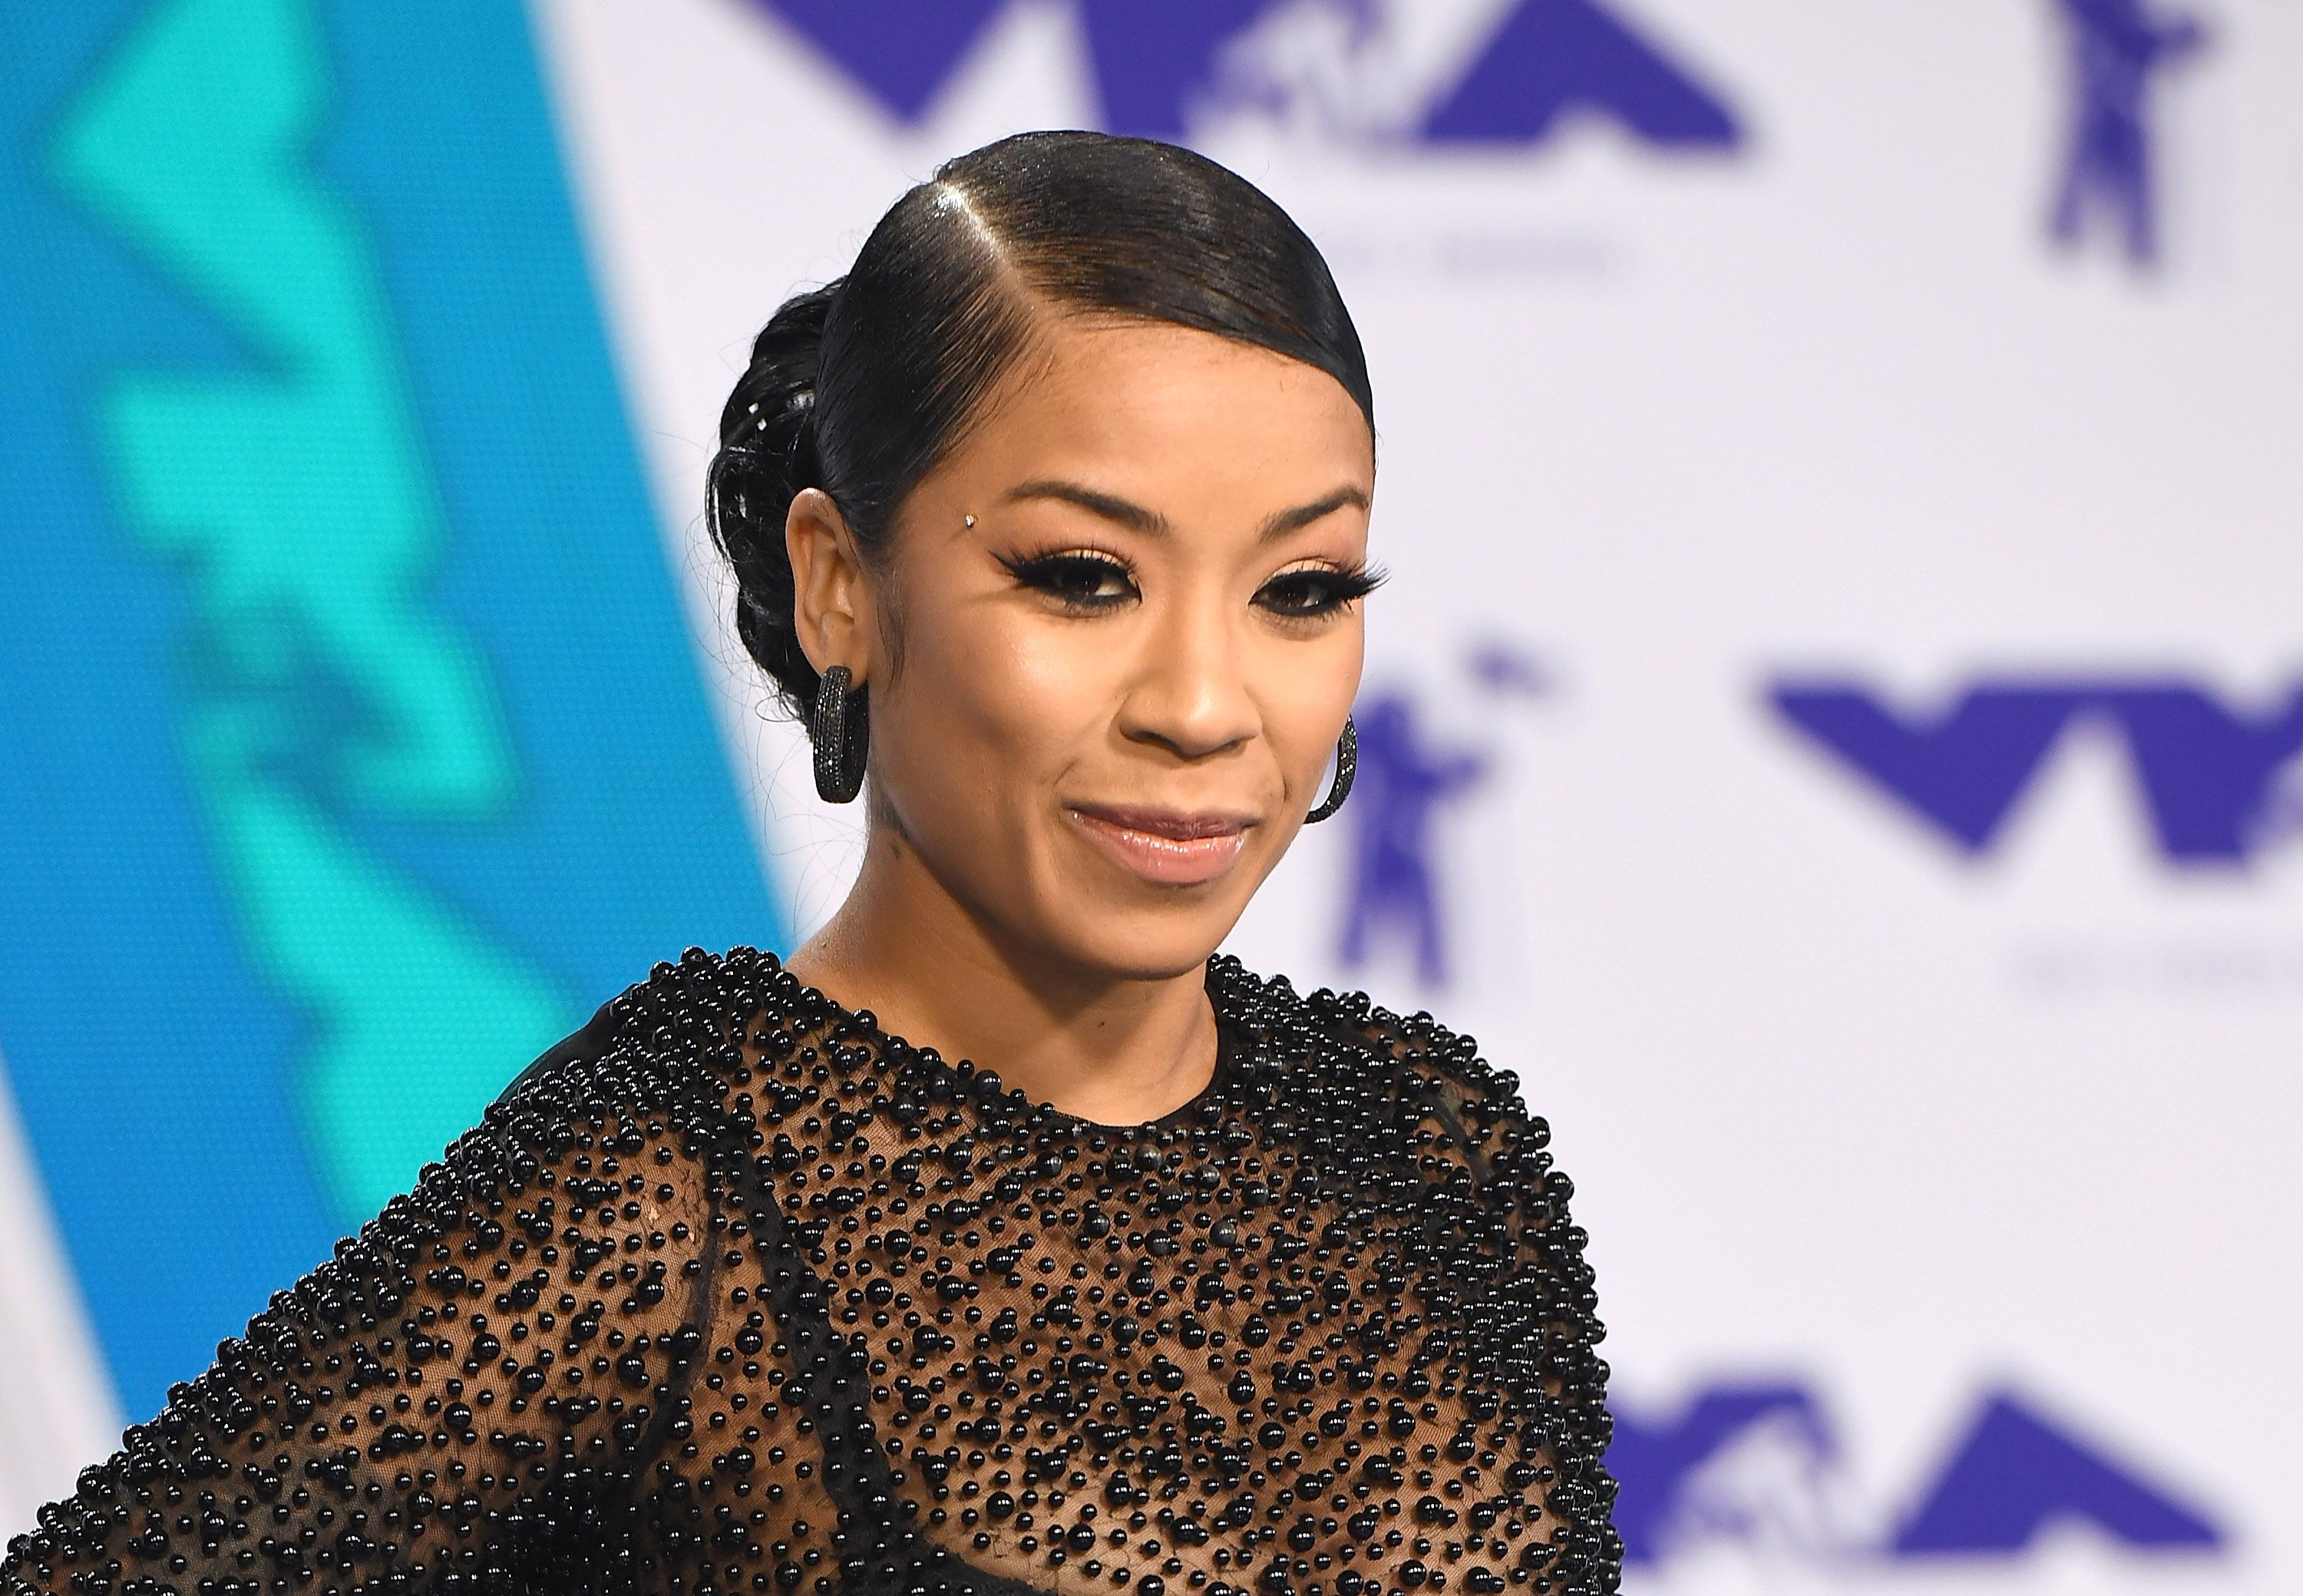 Keyshia Cole at the 2017 MTV Video Music Awards in California on Aug. 27, 2017. | Photo: Getty Images